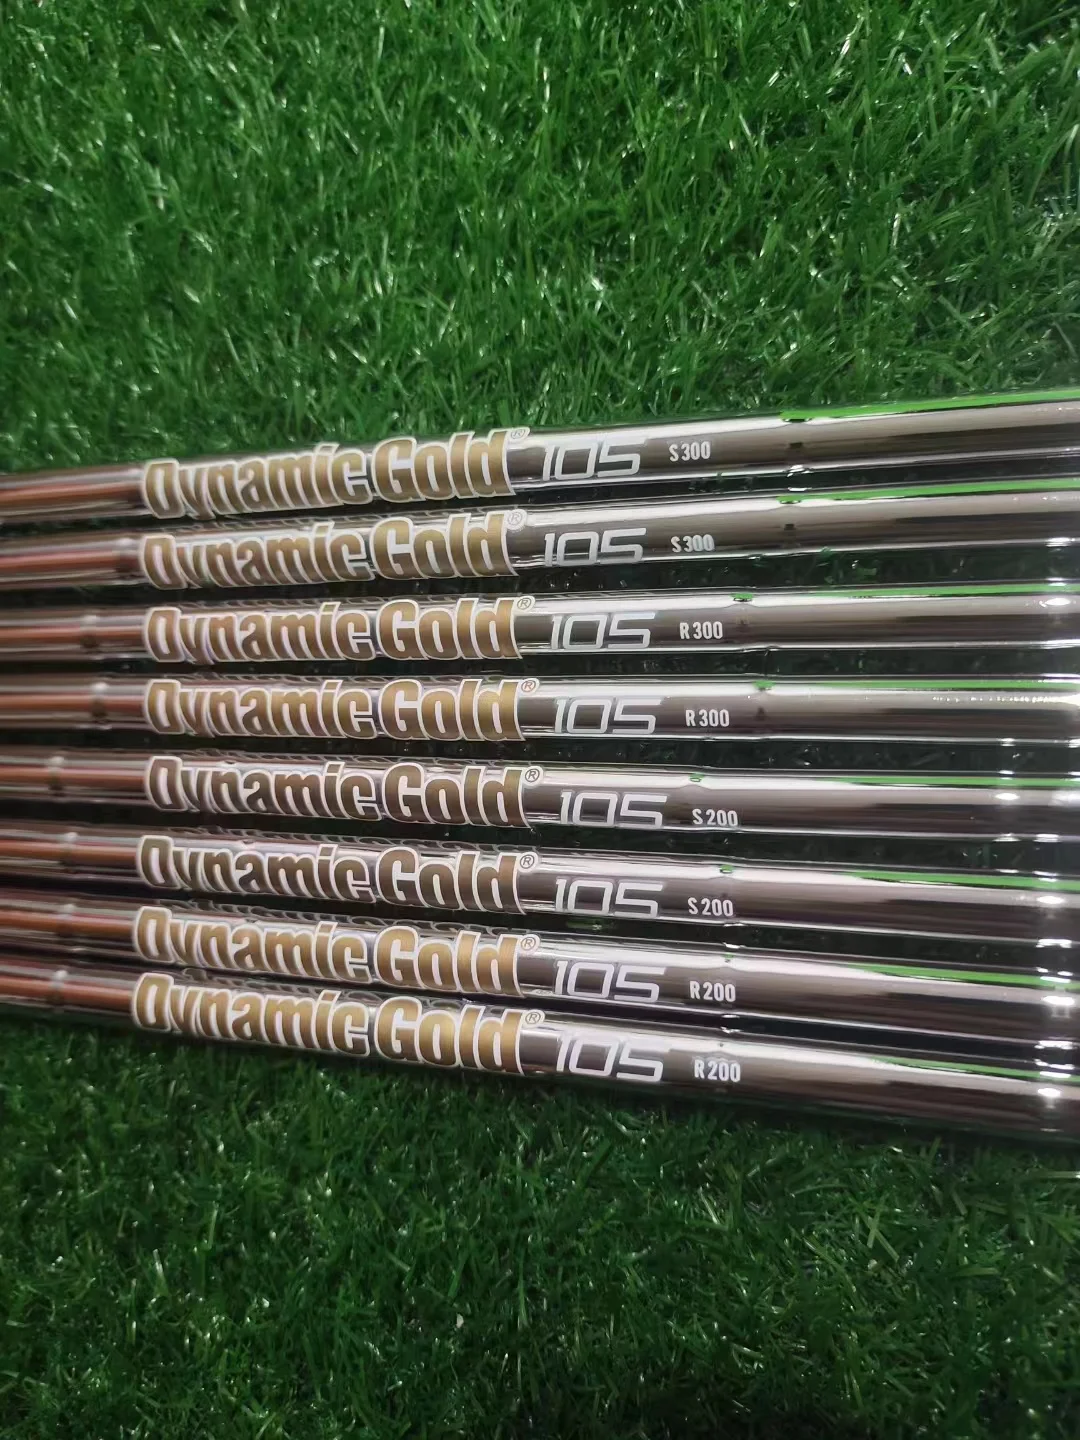 

golf irons steel shaft 39inch silver Dynamic Gold 105 R200/S200/R300/S300 clubs shaft10pcs batch up order 0.370